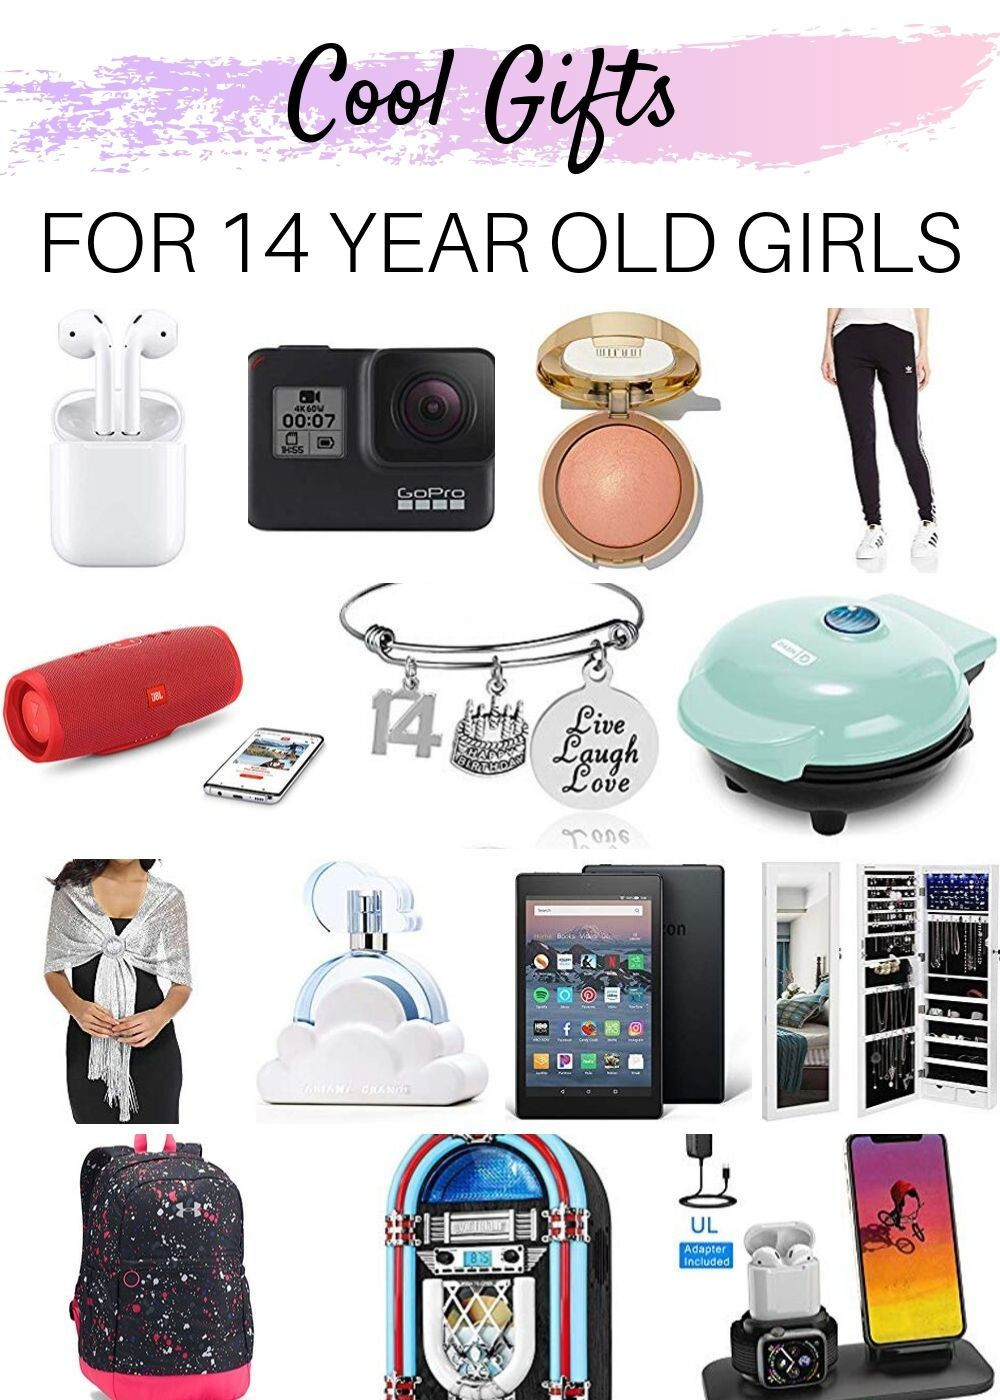 Gift Ideas For 14 Year Old Girls
 Pin on Gifts for 14 Year Old Girls